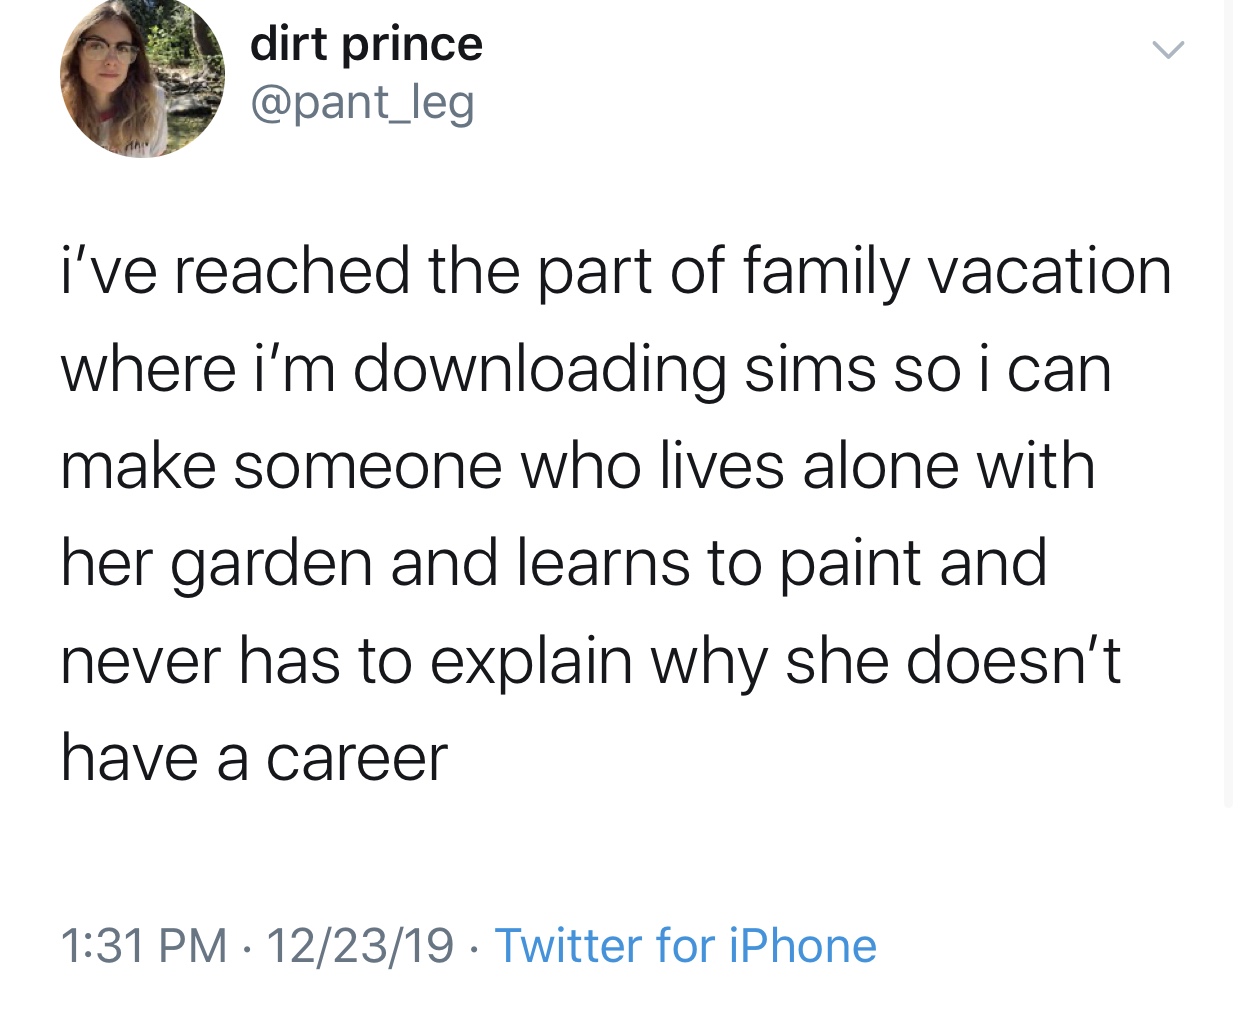 9 dirt prince dirt prince i've reached the part of family vacation where i'm downloading sims so i can make someone who lives alone with her garden and learns to paint and never has to explain why she doesn't have a career 122319 Twitter for iPhone